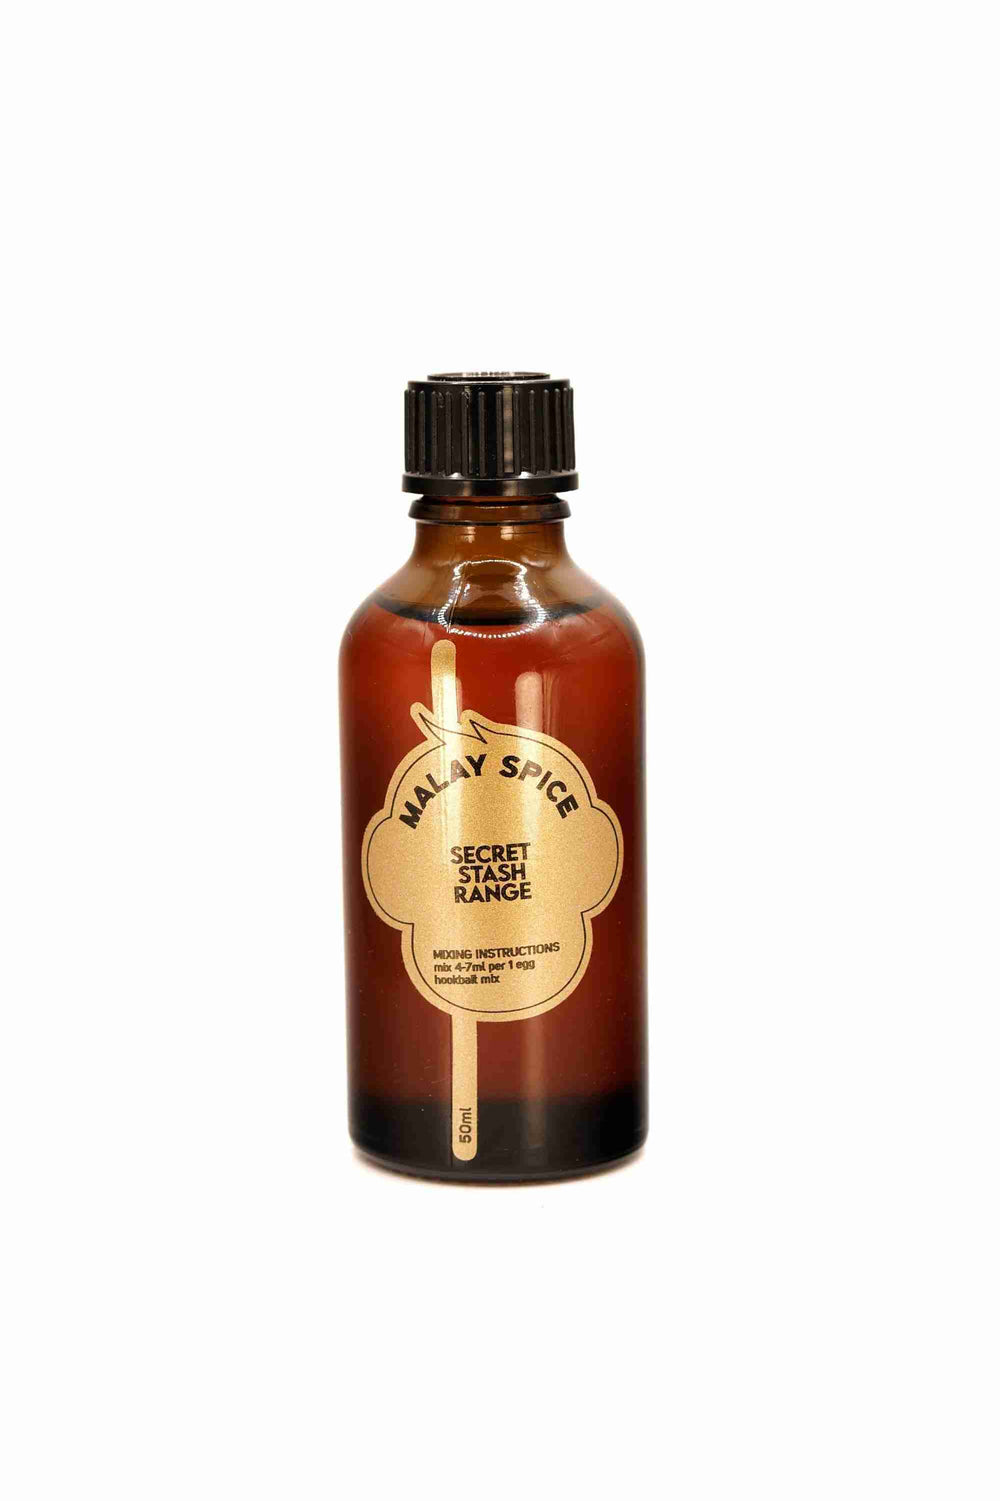 Malay Spice [Secret Stash] flavour concentrate - Forgotten Flavours & On Point